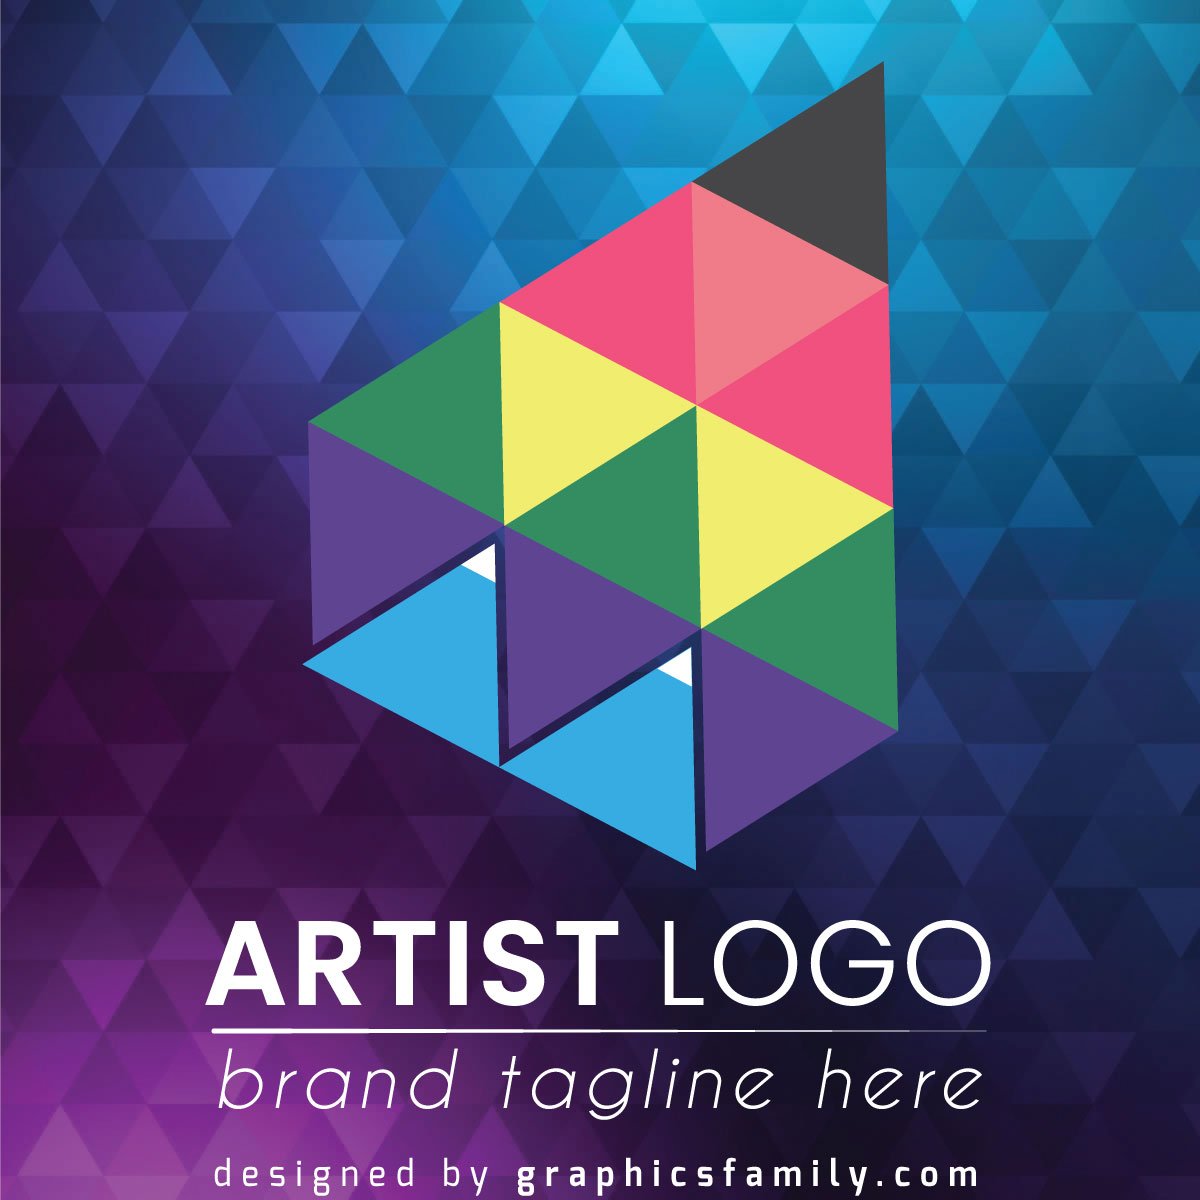 How To Present Logo Design Projects